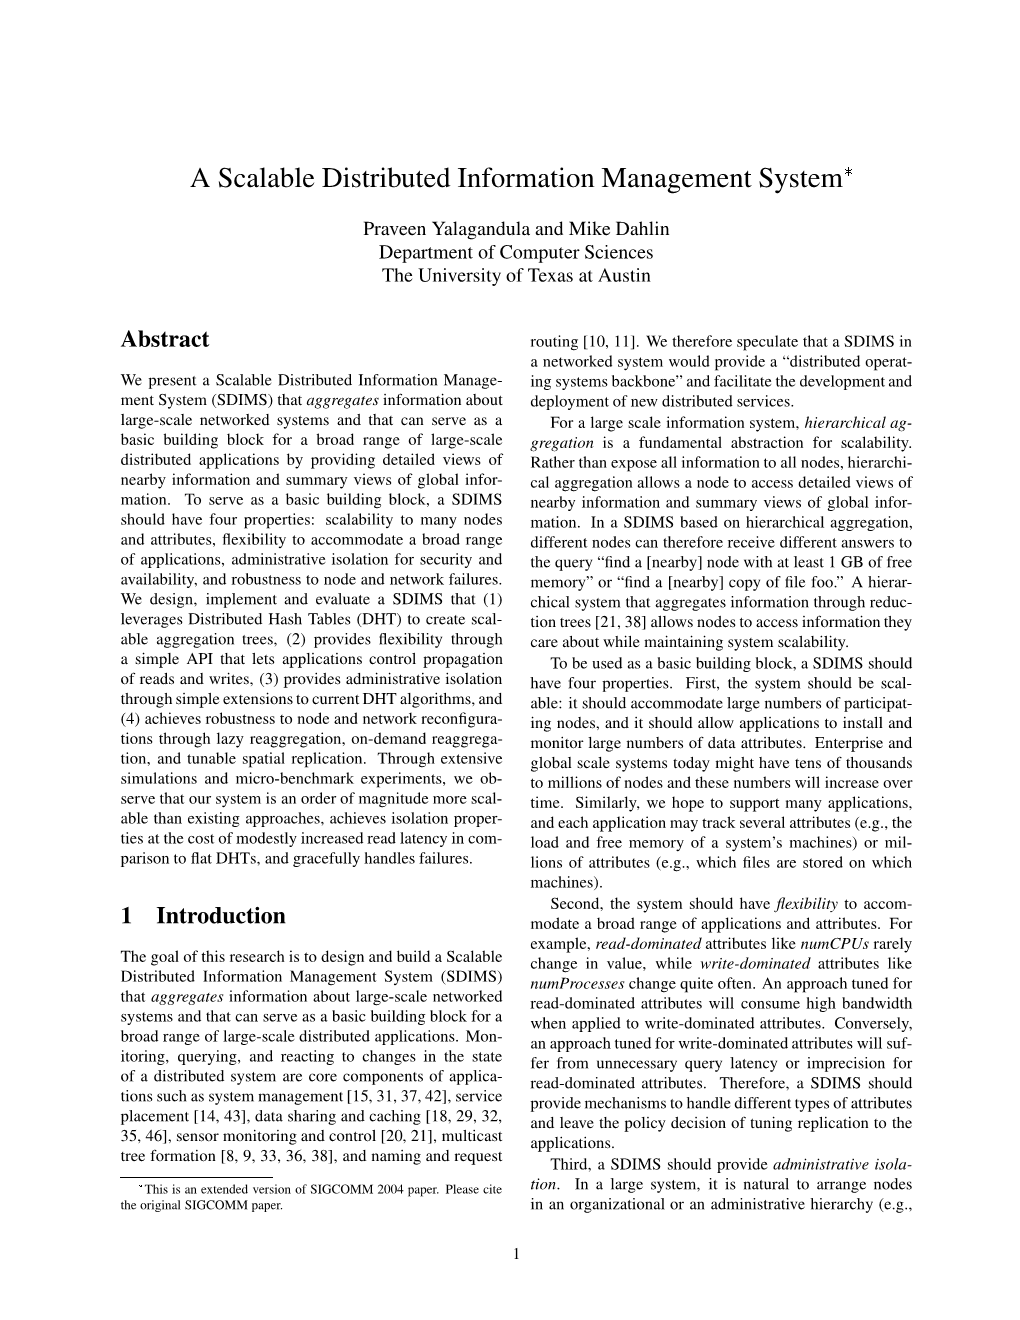 A Scalable Distributed Information Management System